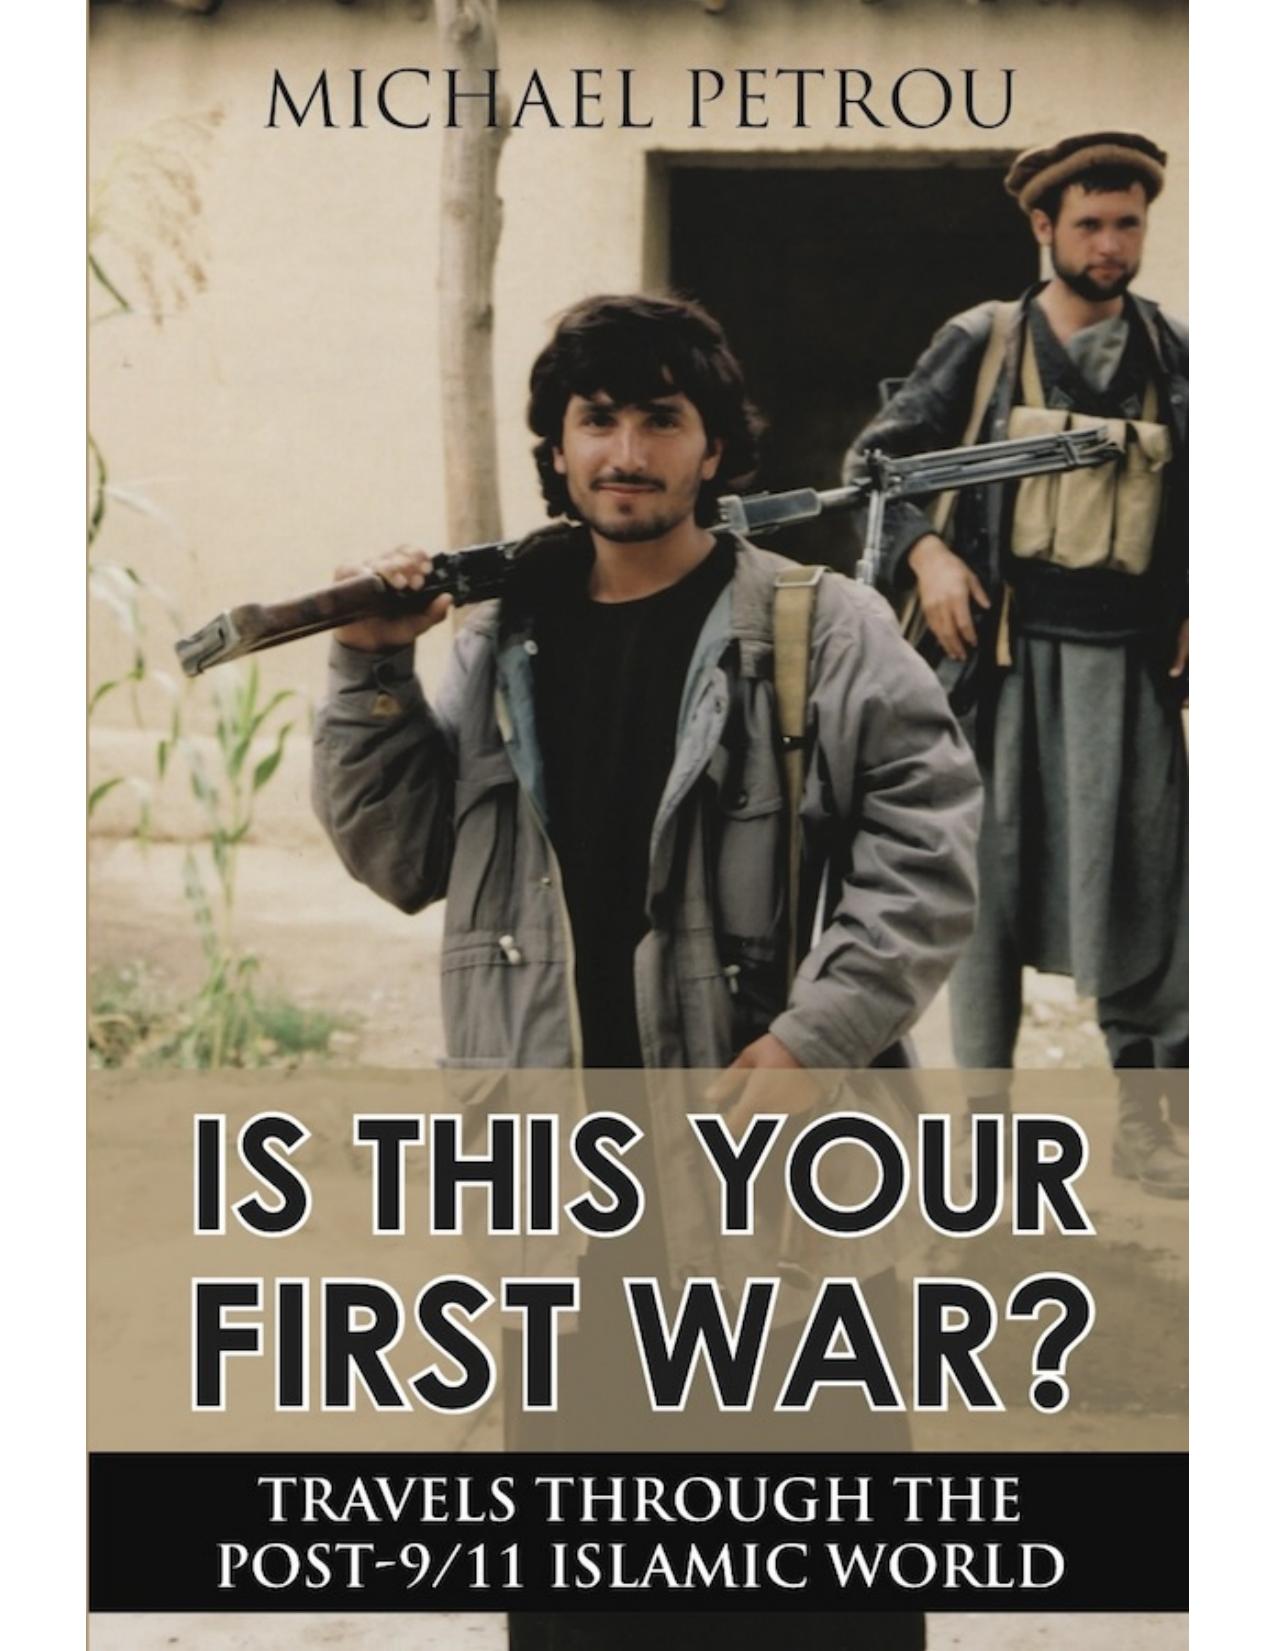 Is This Your First War? by Michael Petrou